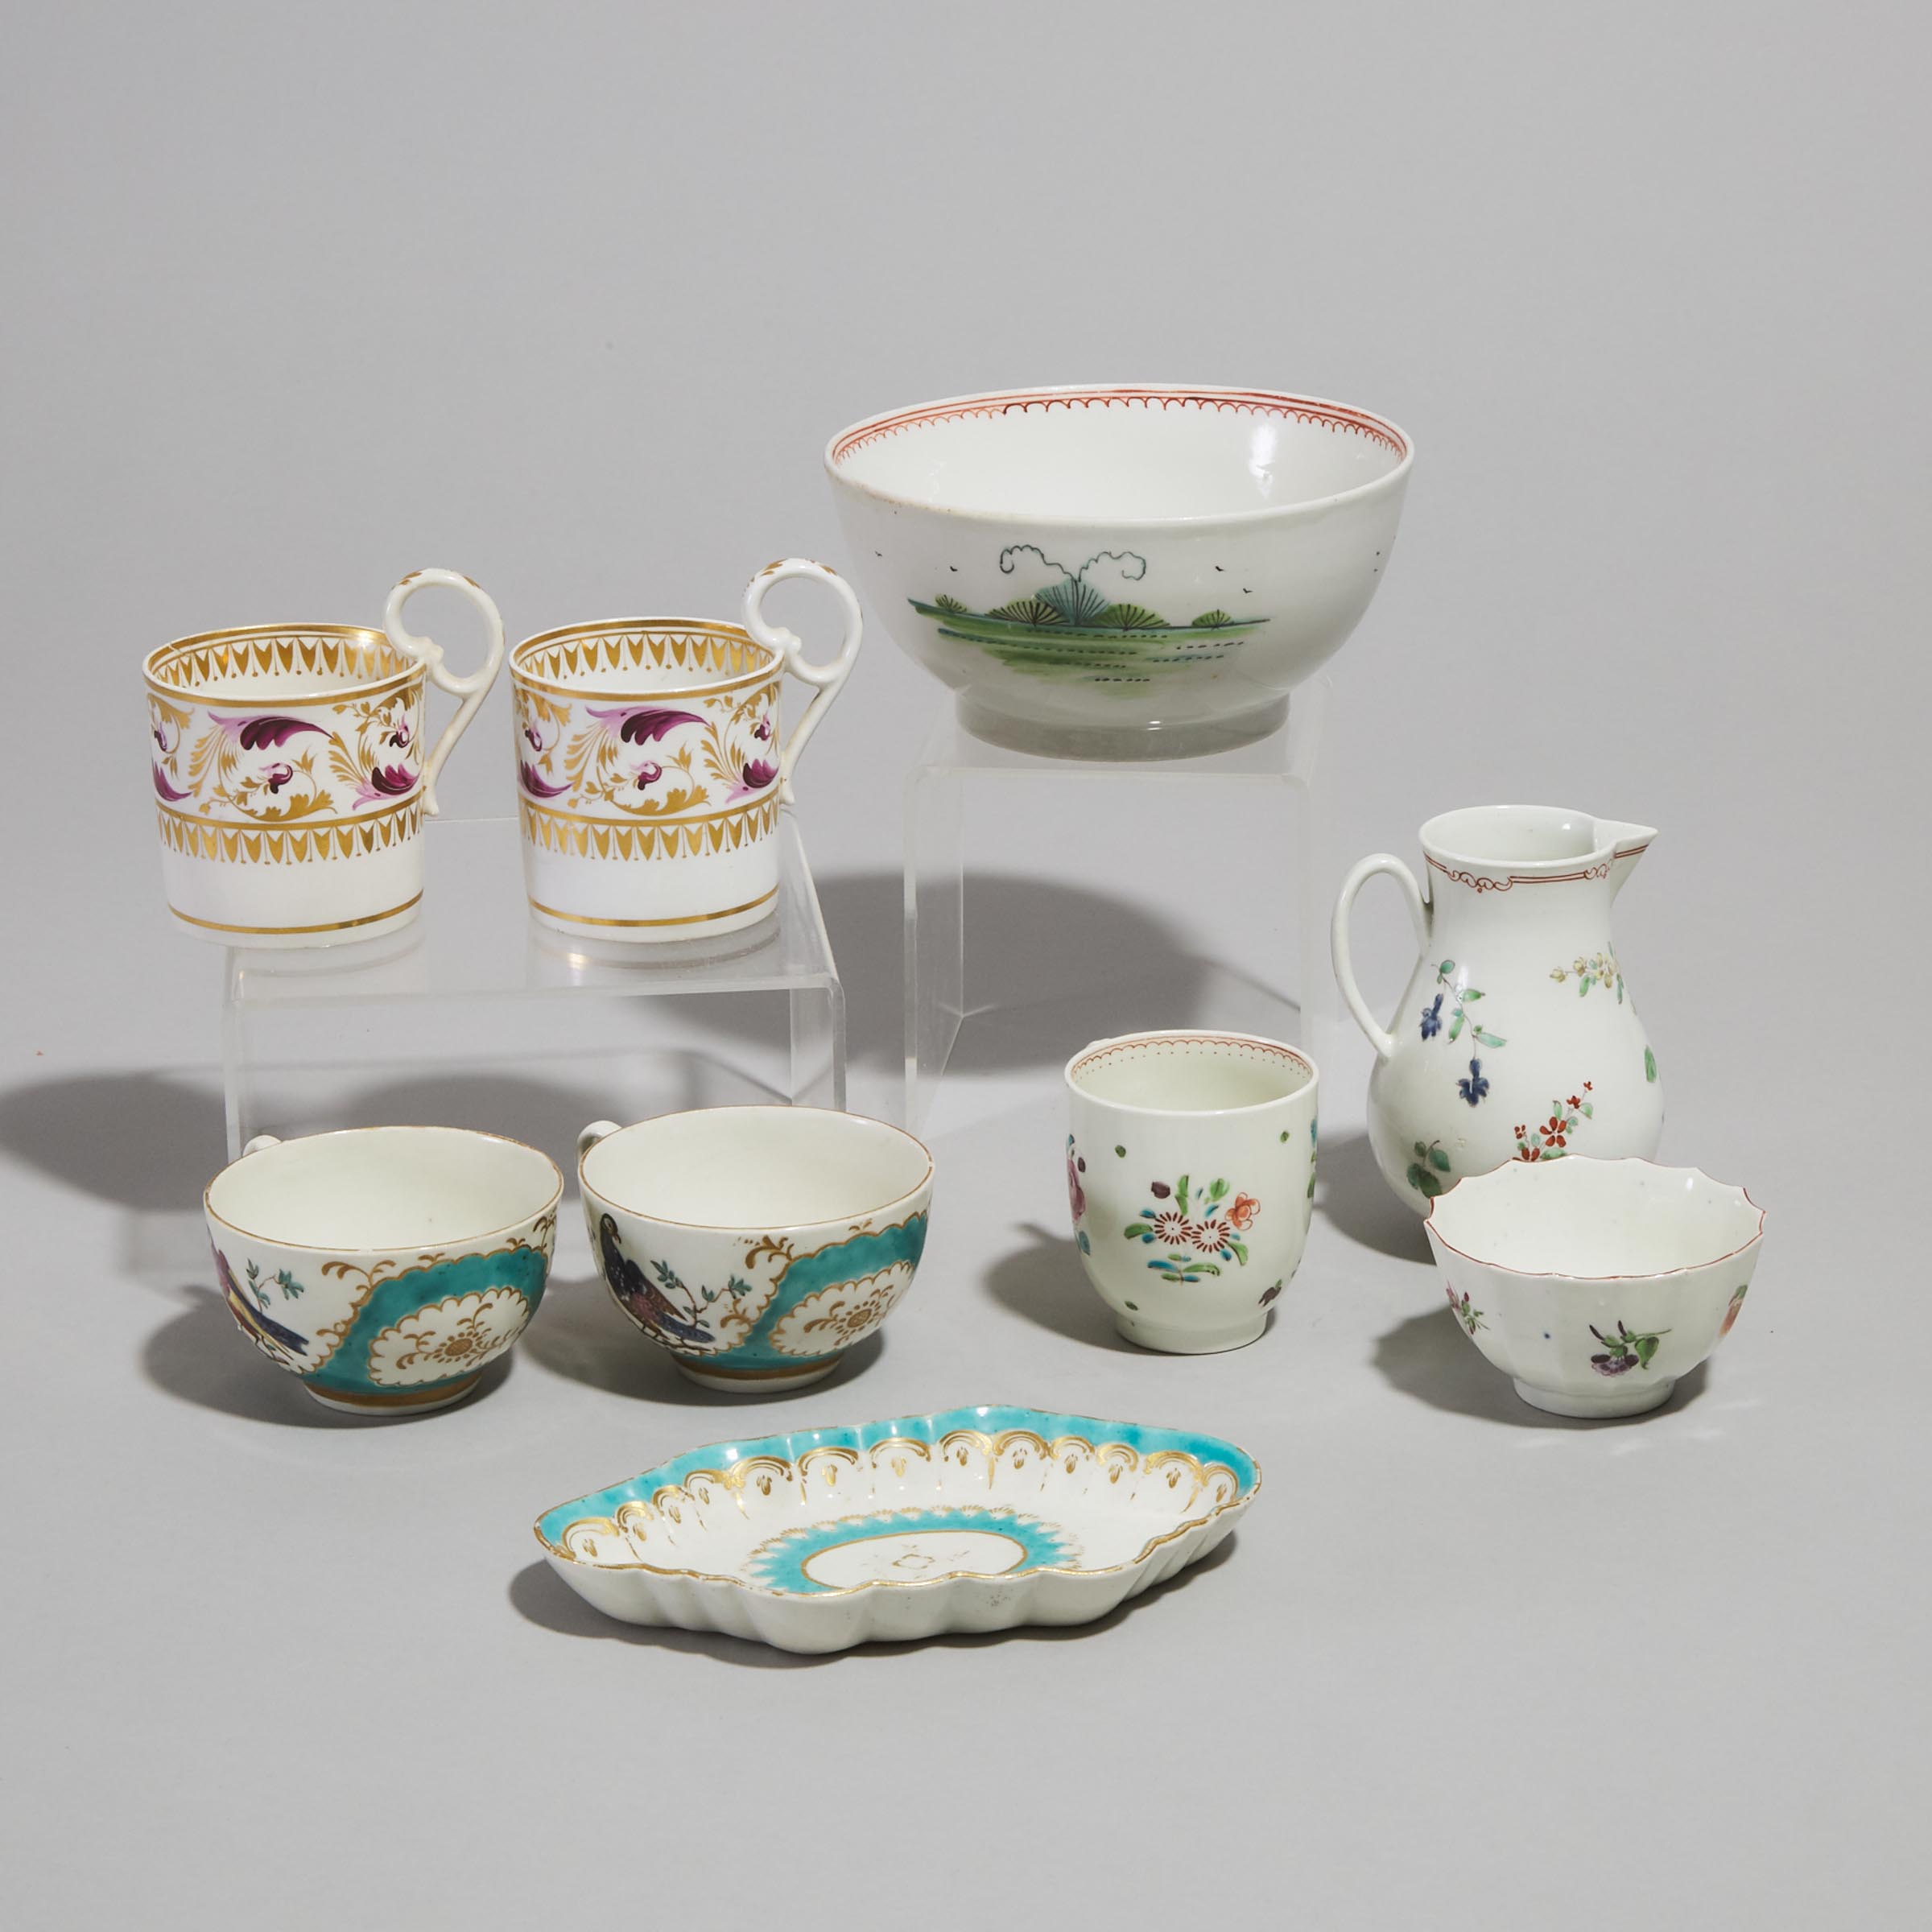 Group of English Porcelain, 18th/early 19th century